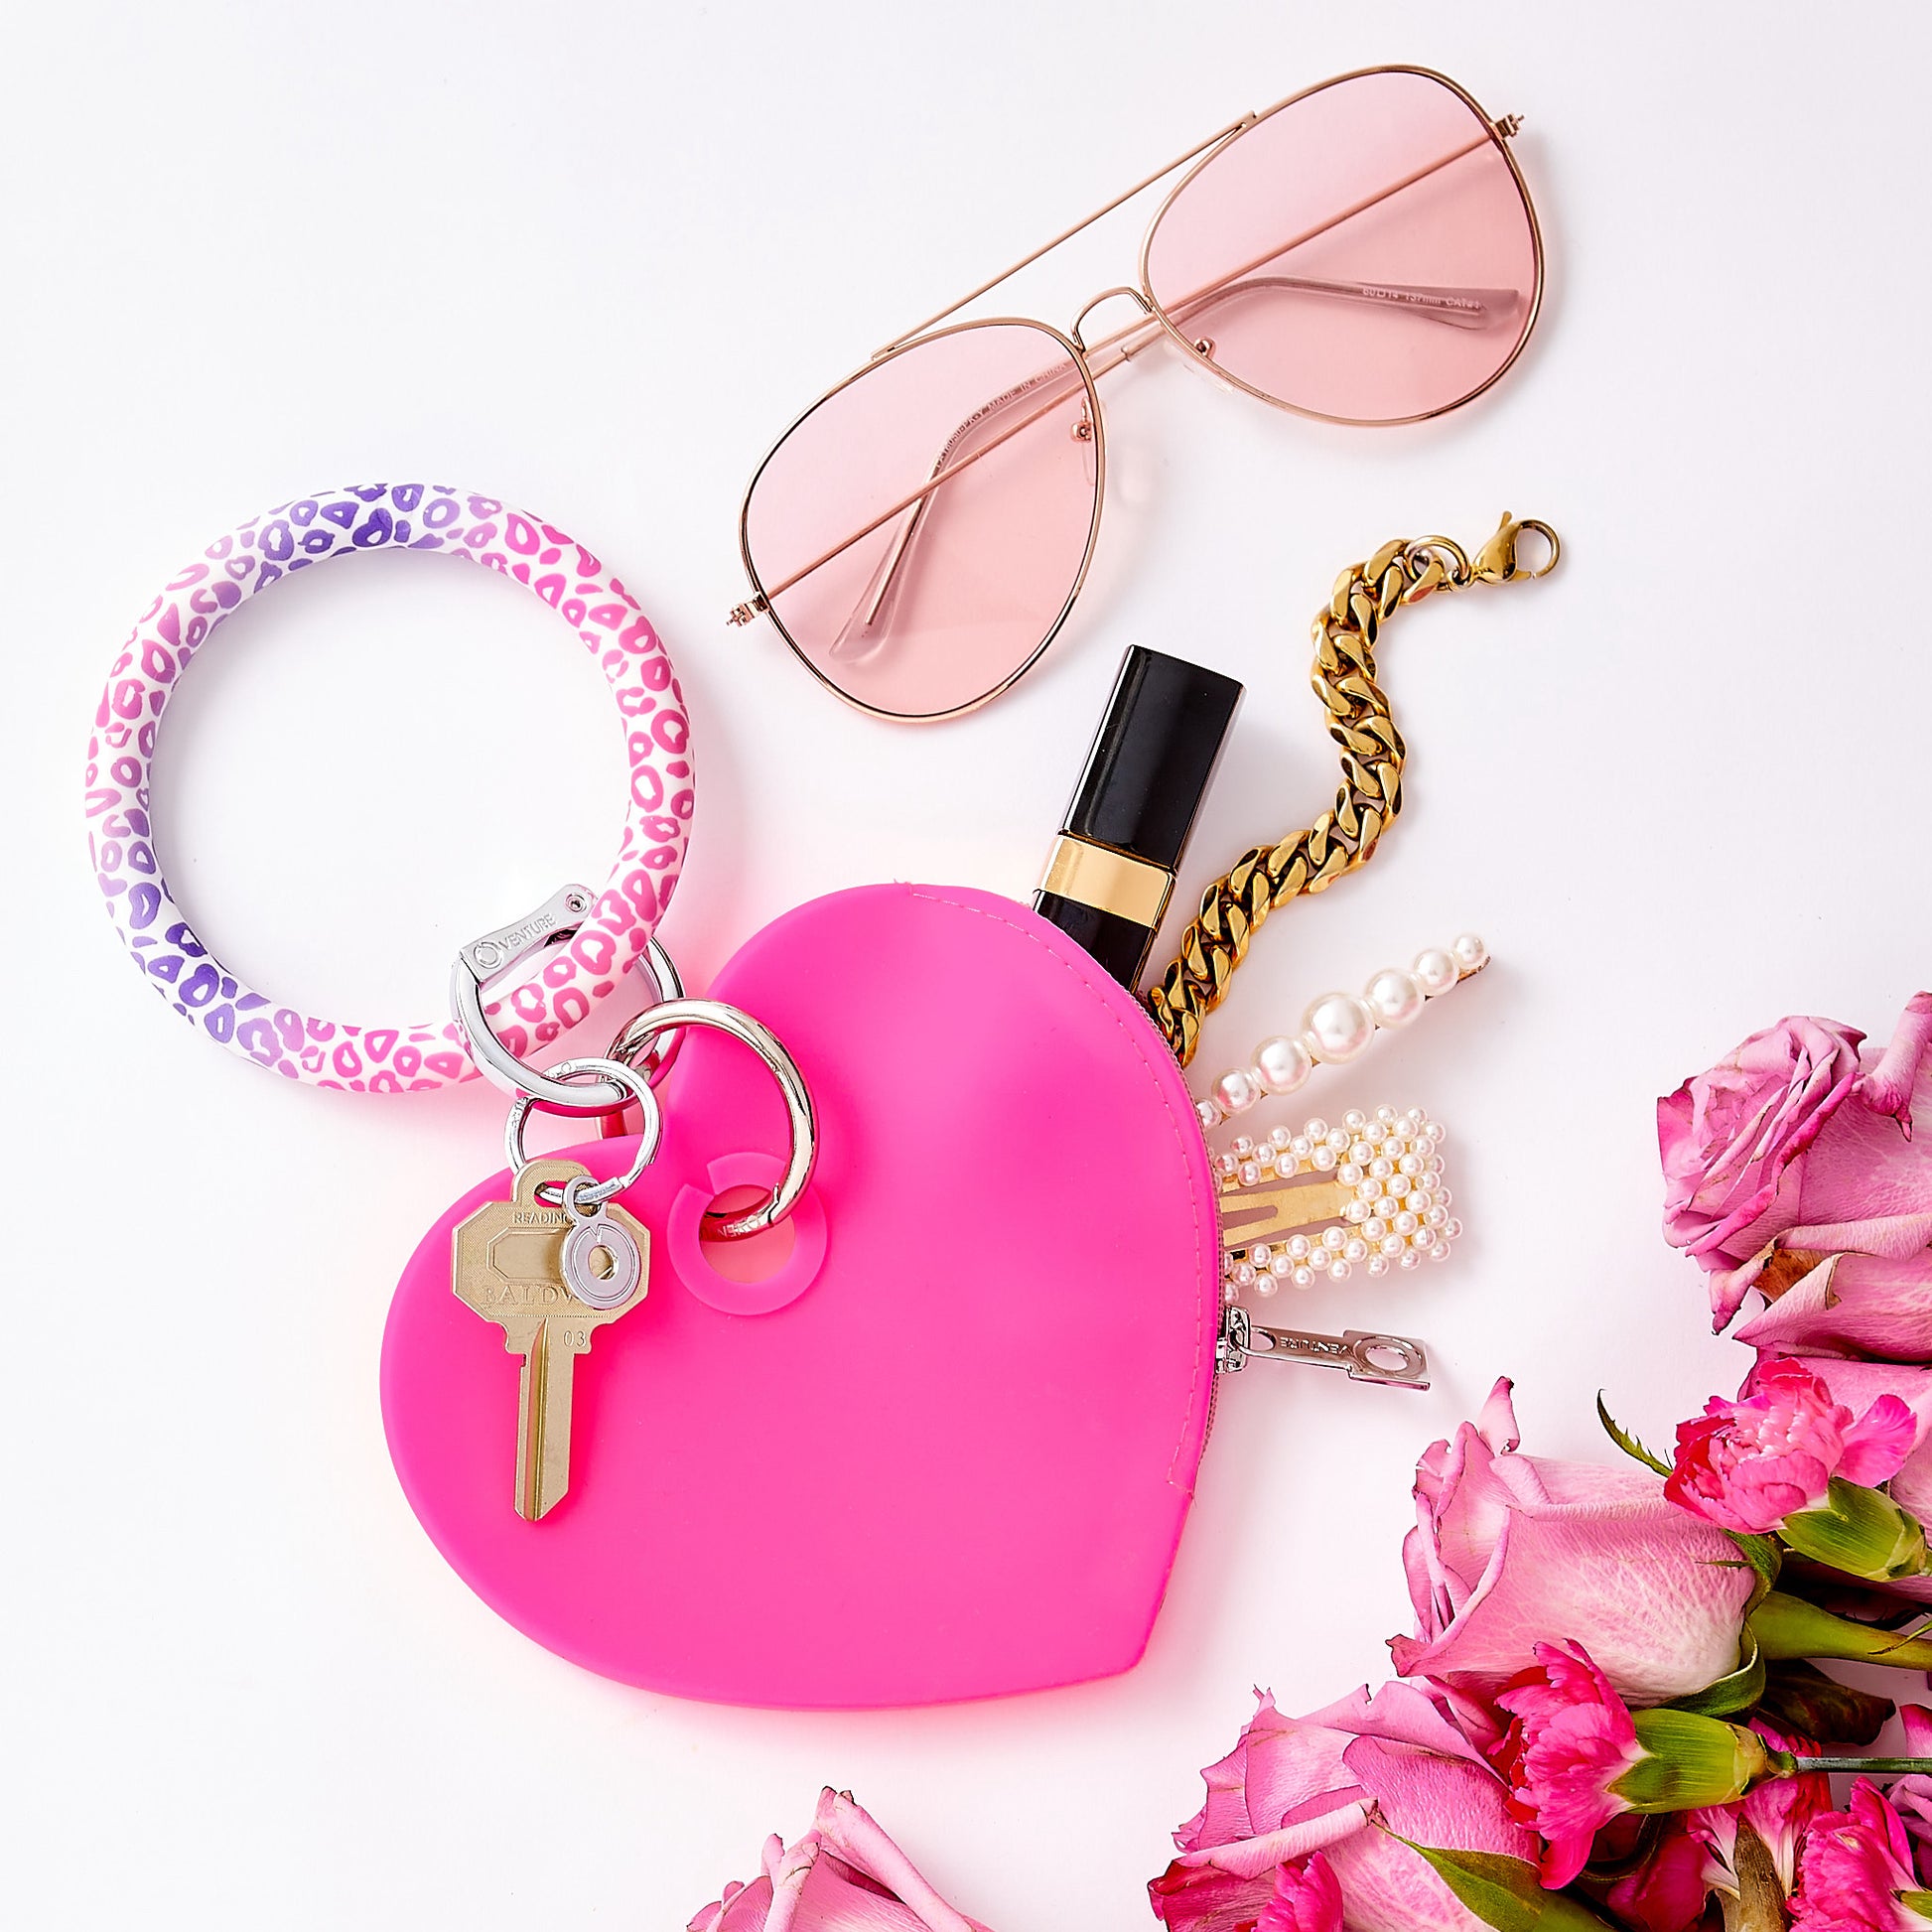 Tickled Pink - Silicone Heart Pouch - Oventure shown with Big O Key ring in pink cheetah silicone print